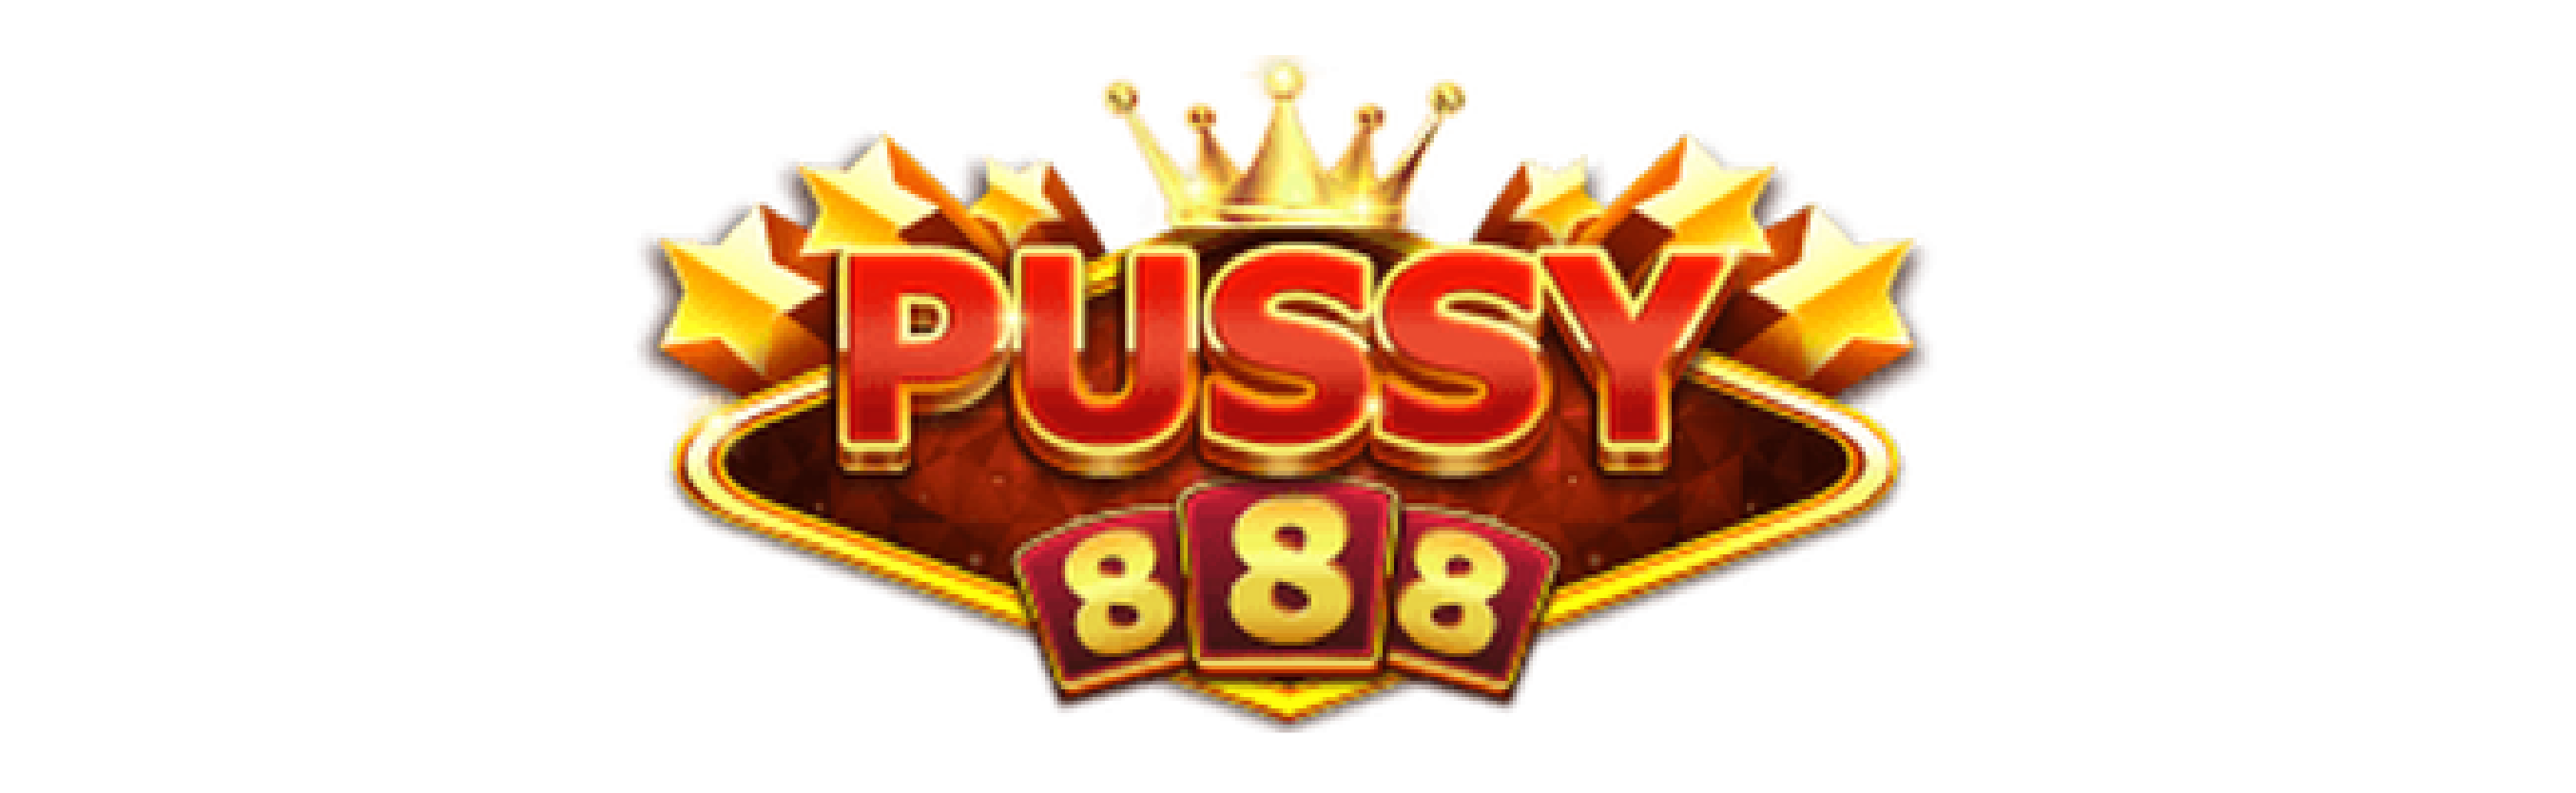 Pussy888 Review